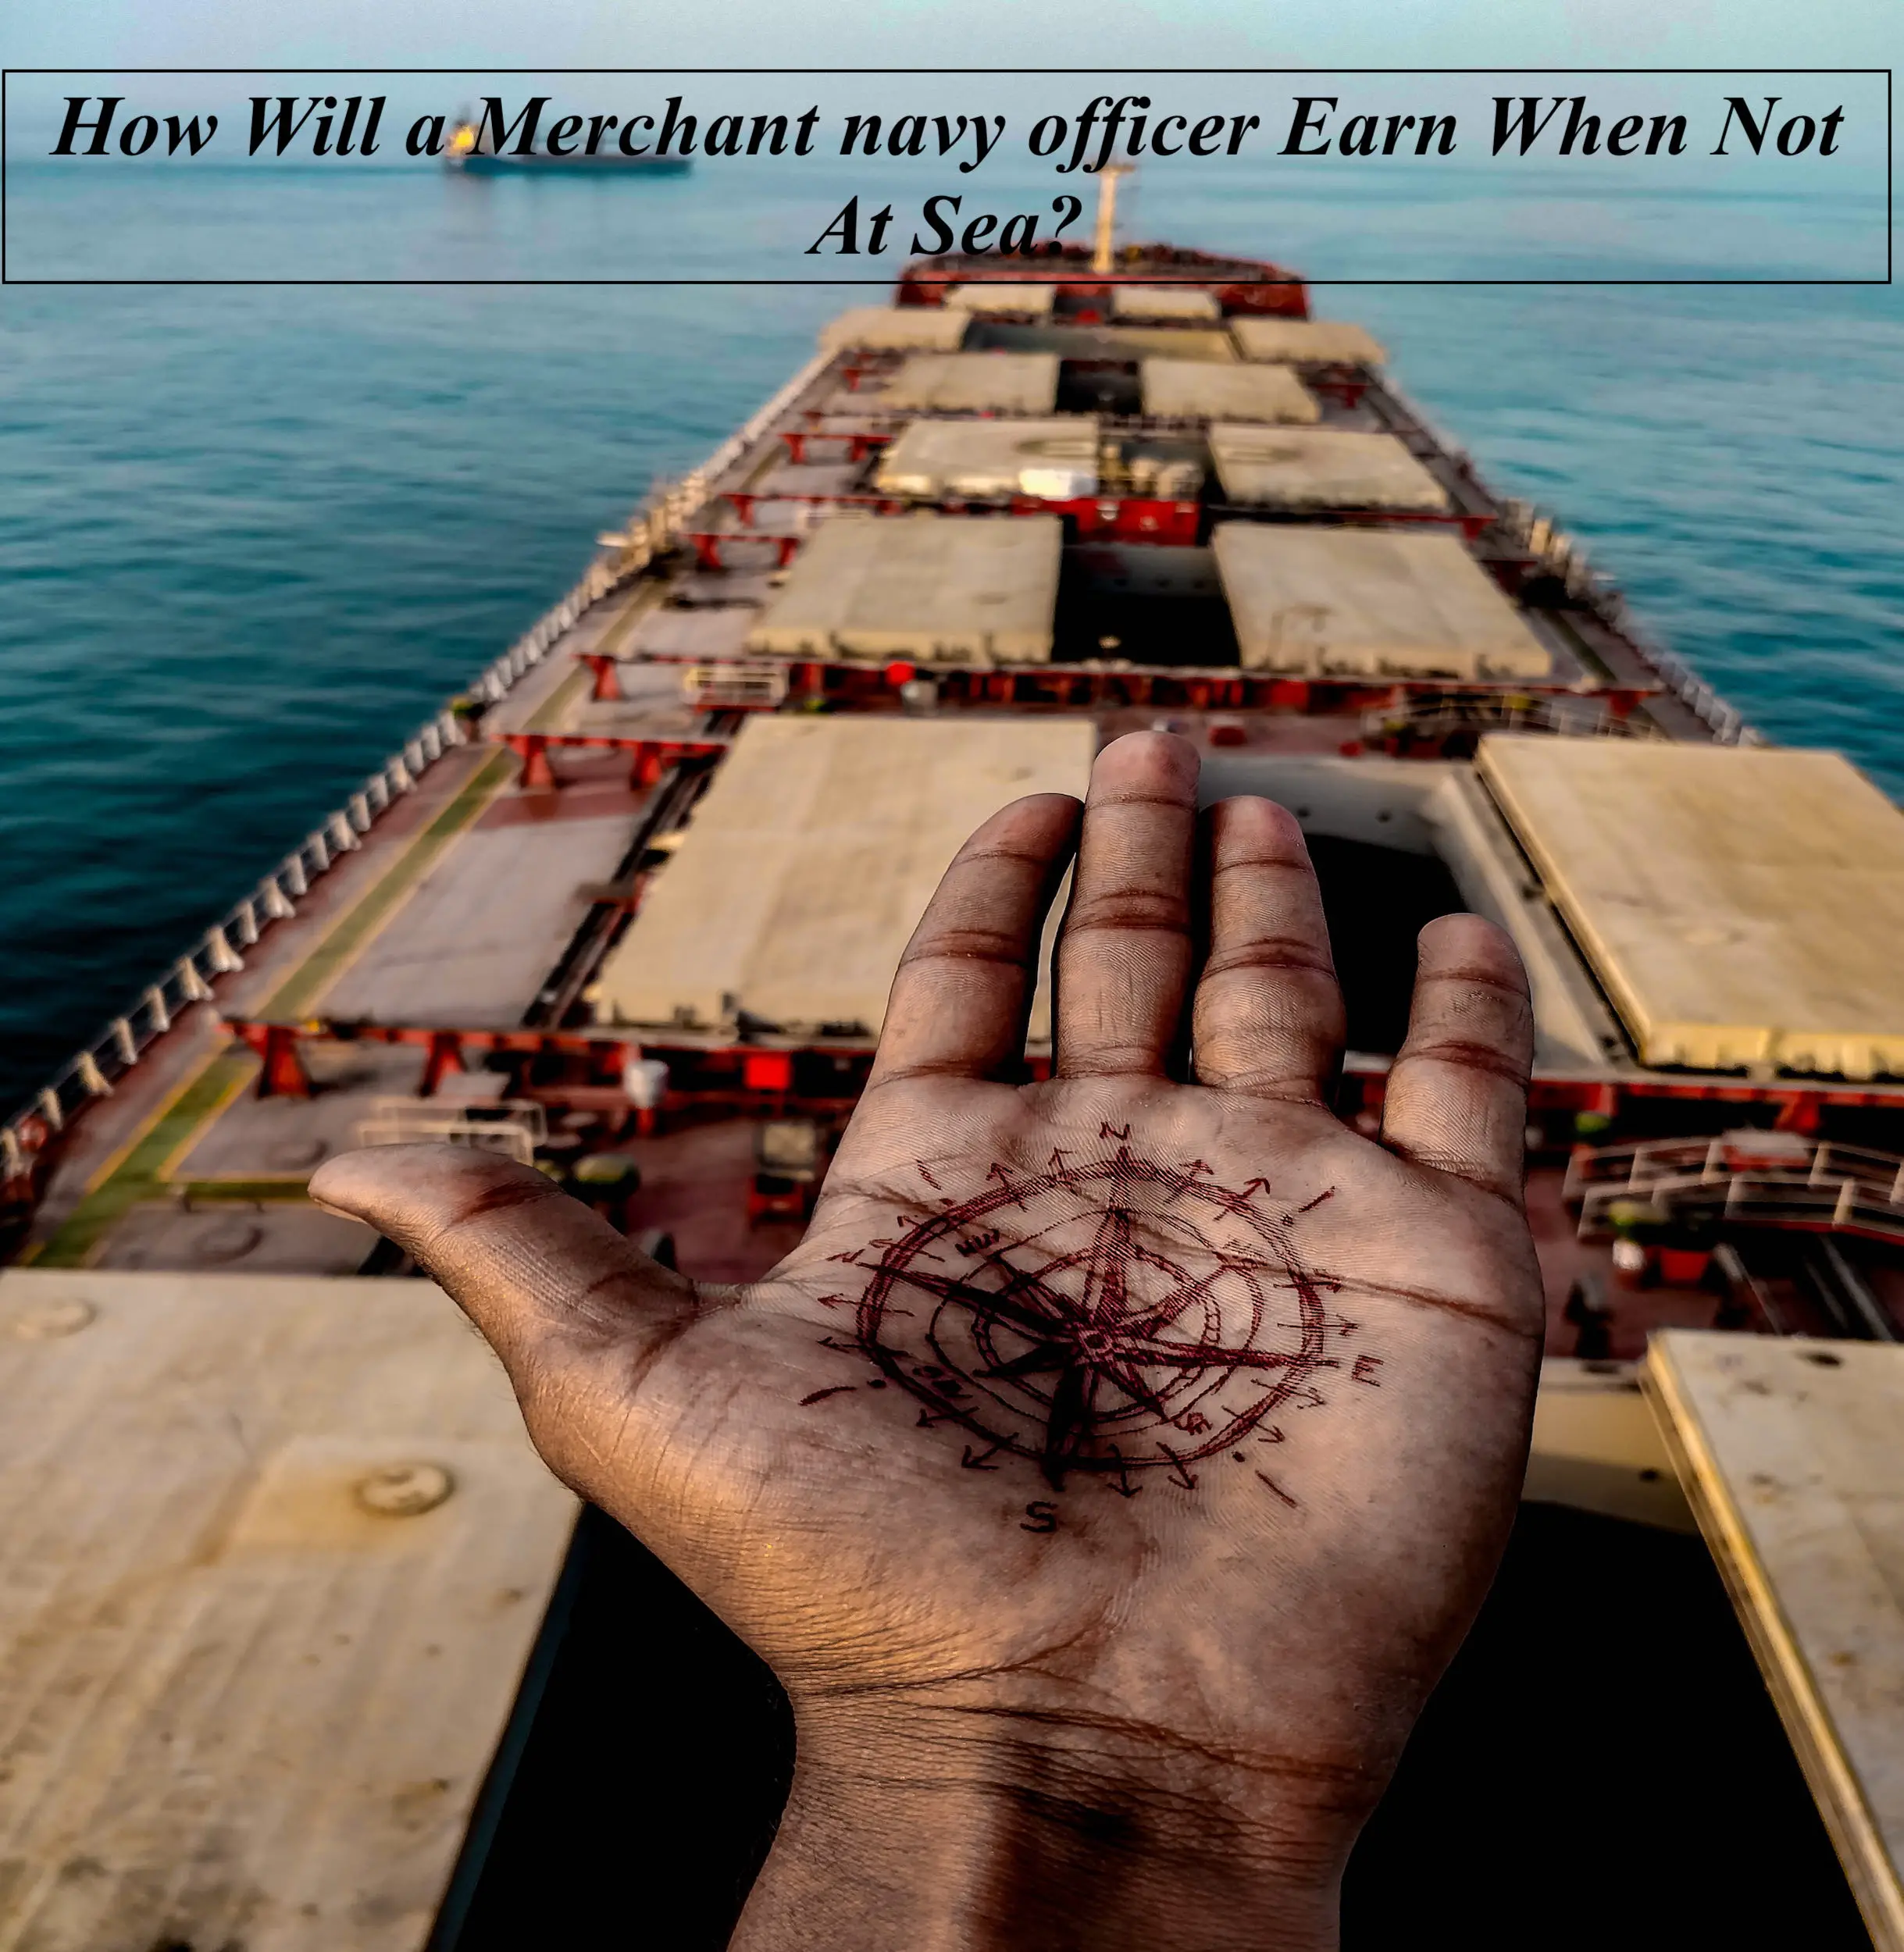 How Will a Merchant navy officer Earn When Not At Sea?